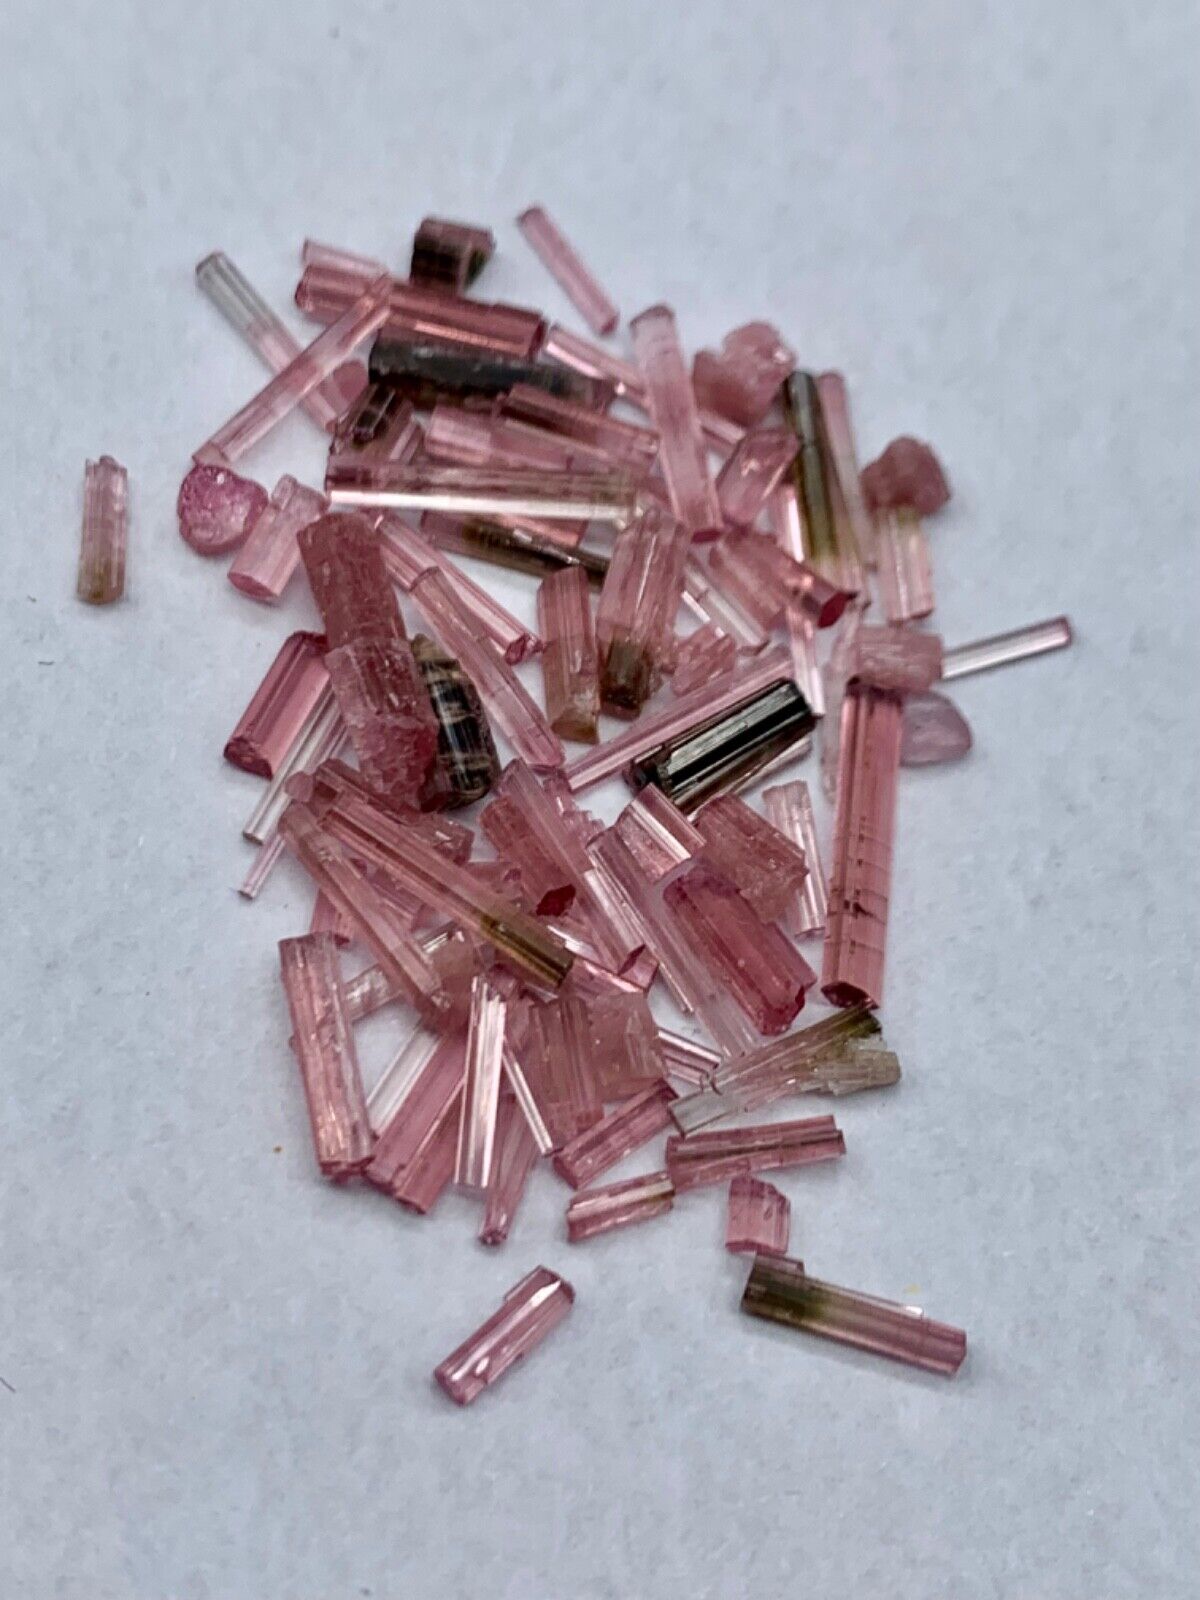 23 Cts Beautiful lot of  Pink Tourmaline Crystals from Afghanistan